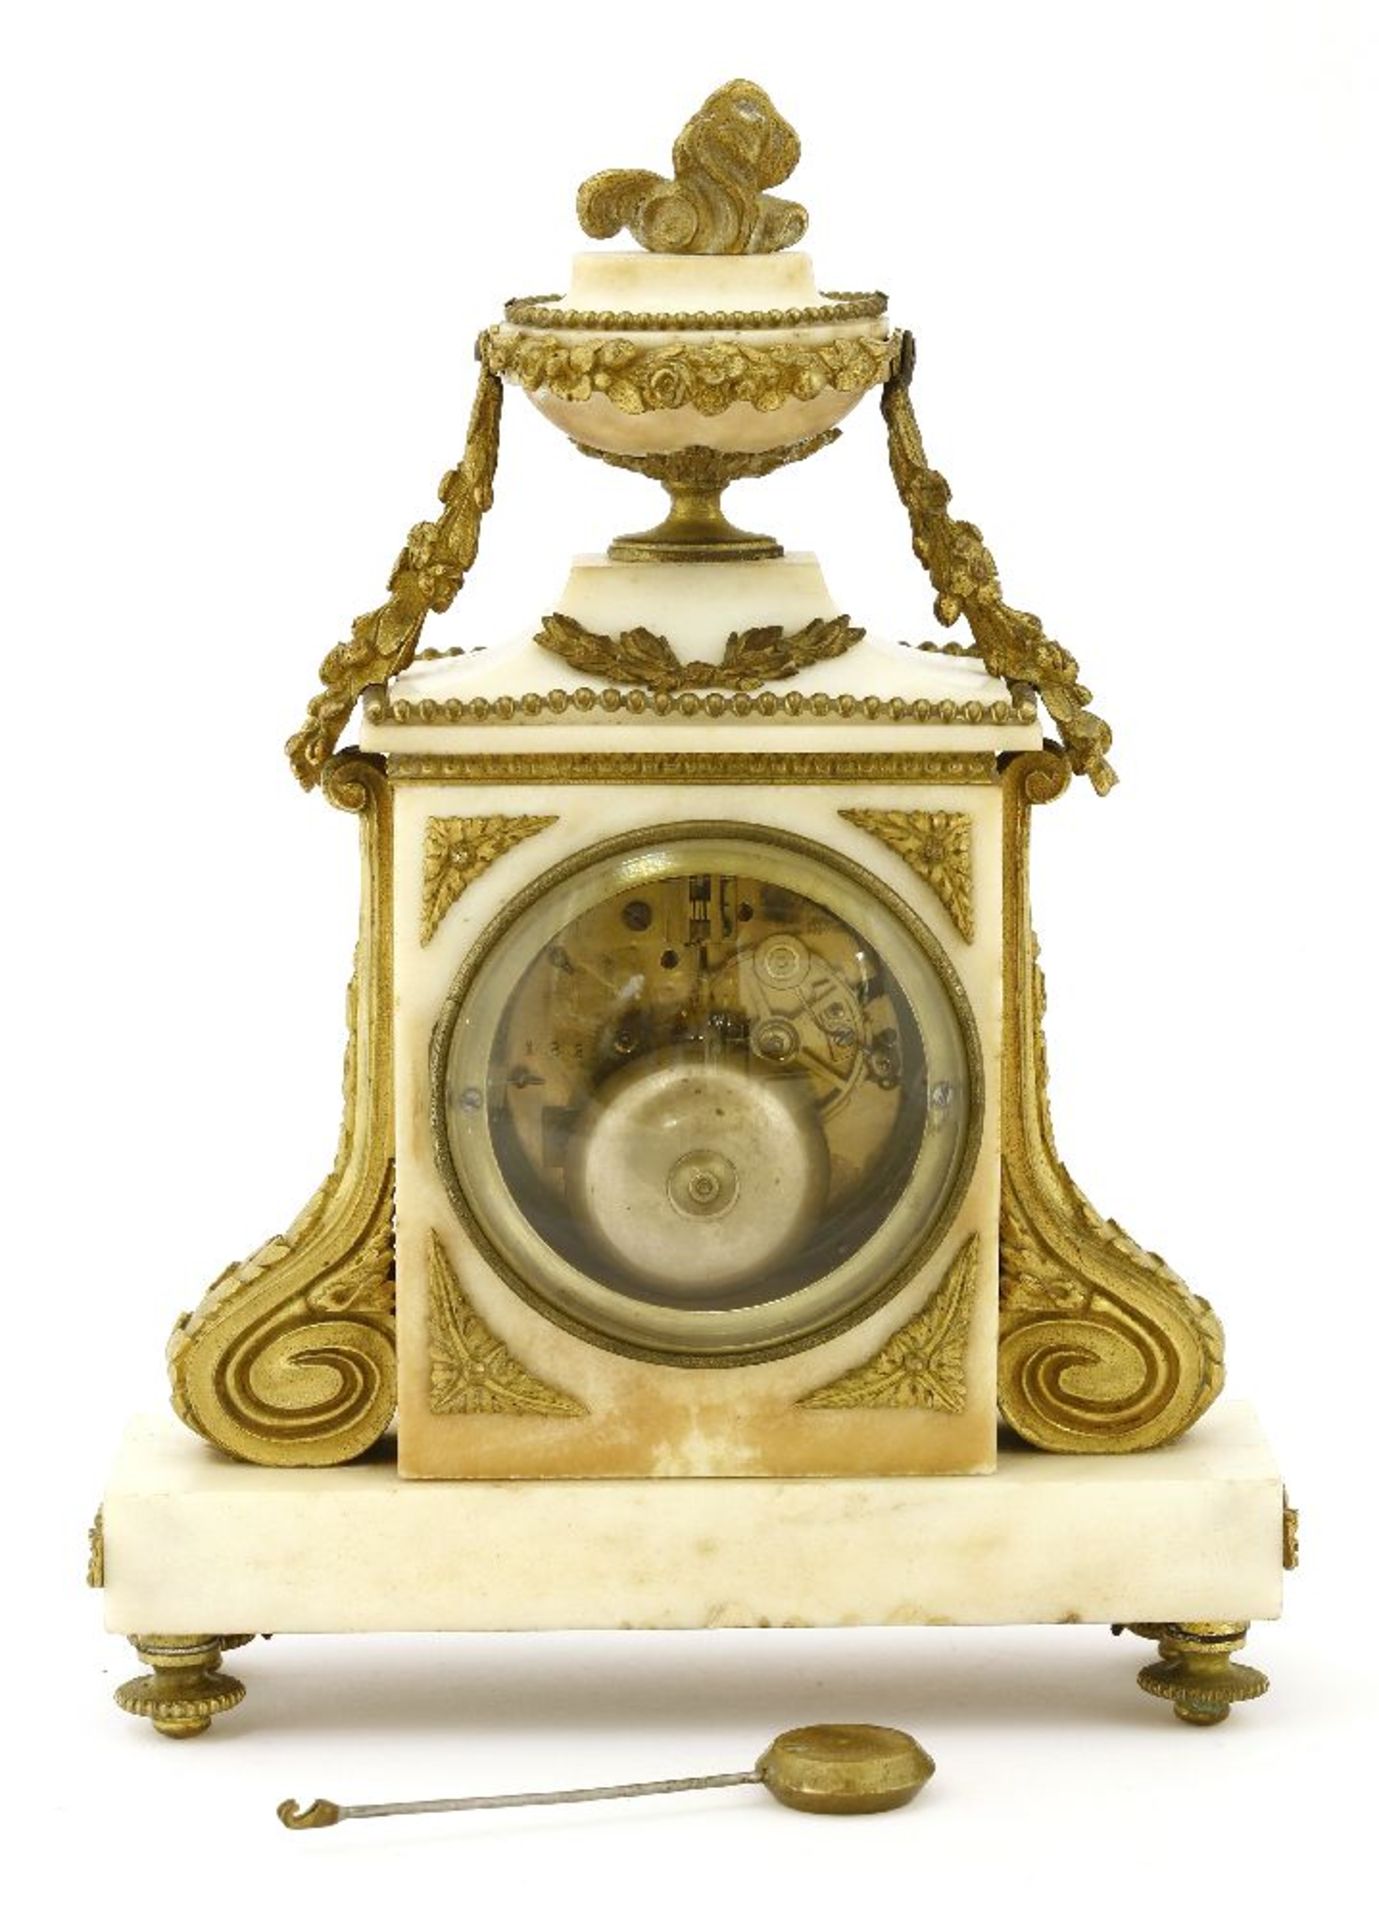 A mantel clock,mid-19th century, signed 'Fd Berthoud', the urn-shaped finial with ormolu beads and - Image 2 of 2